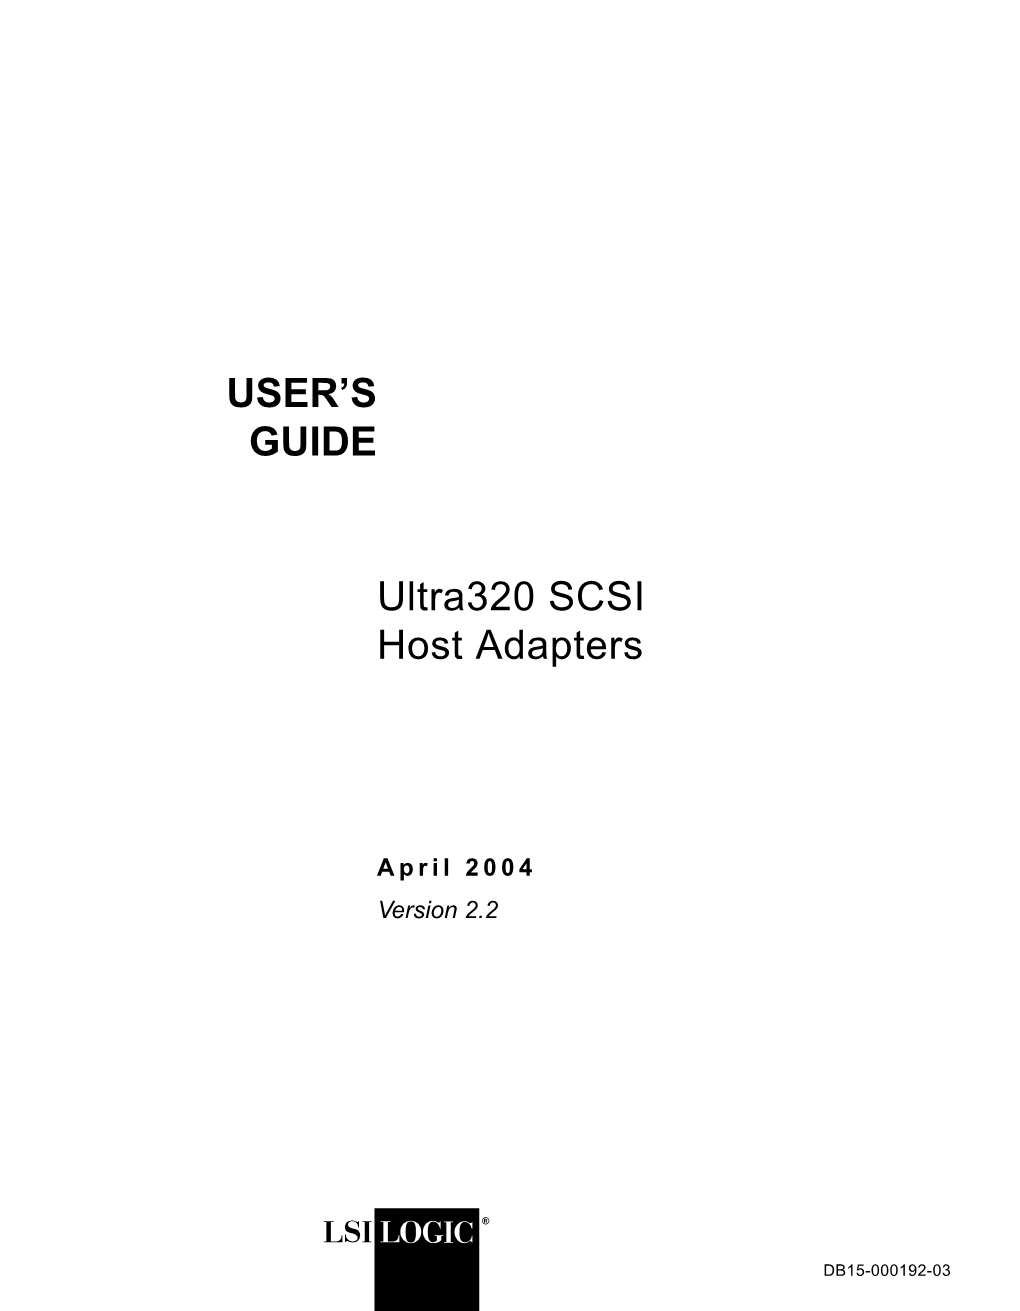 Ultra320 SCSI Host Adapters User's Guide